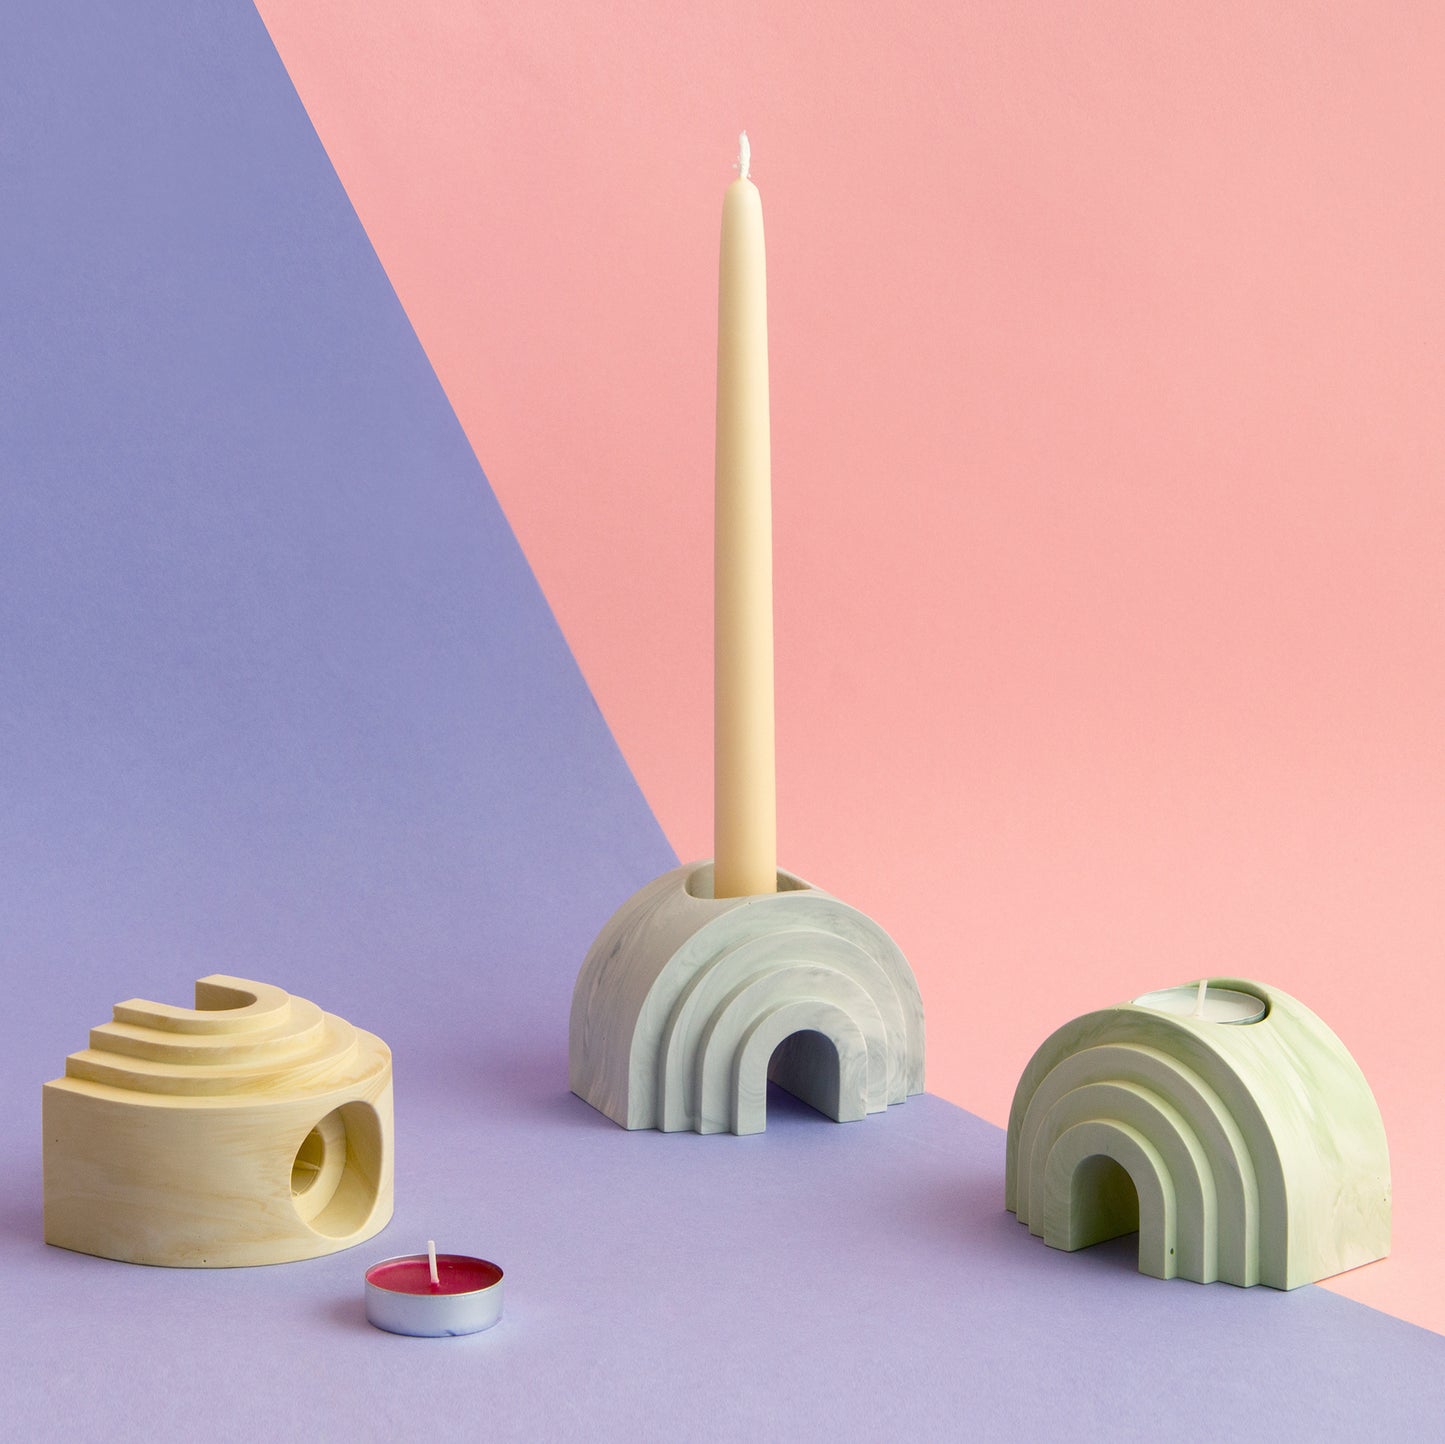 [SCALA] Arch Candle Holder + Tealight Holder